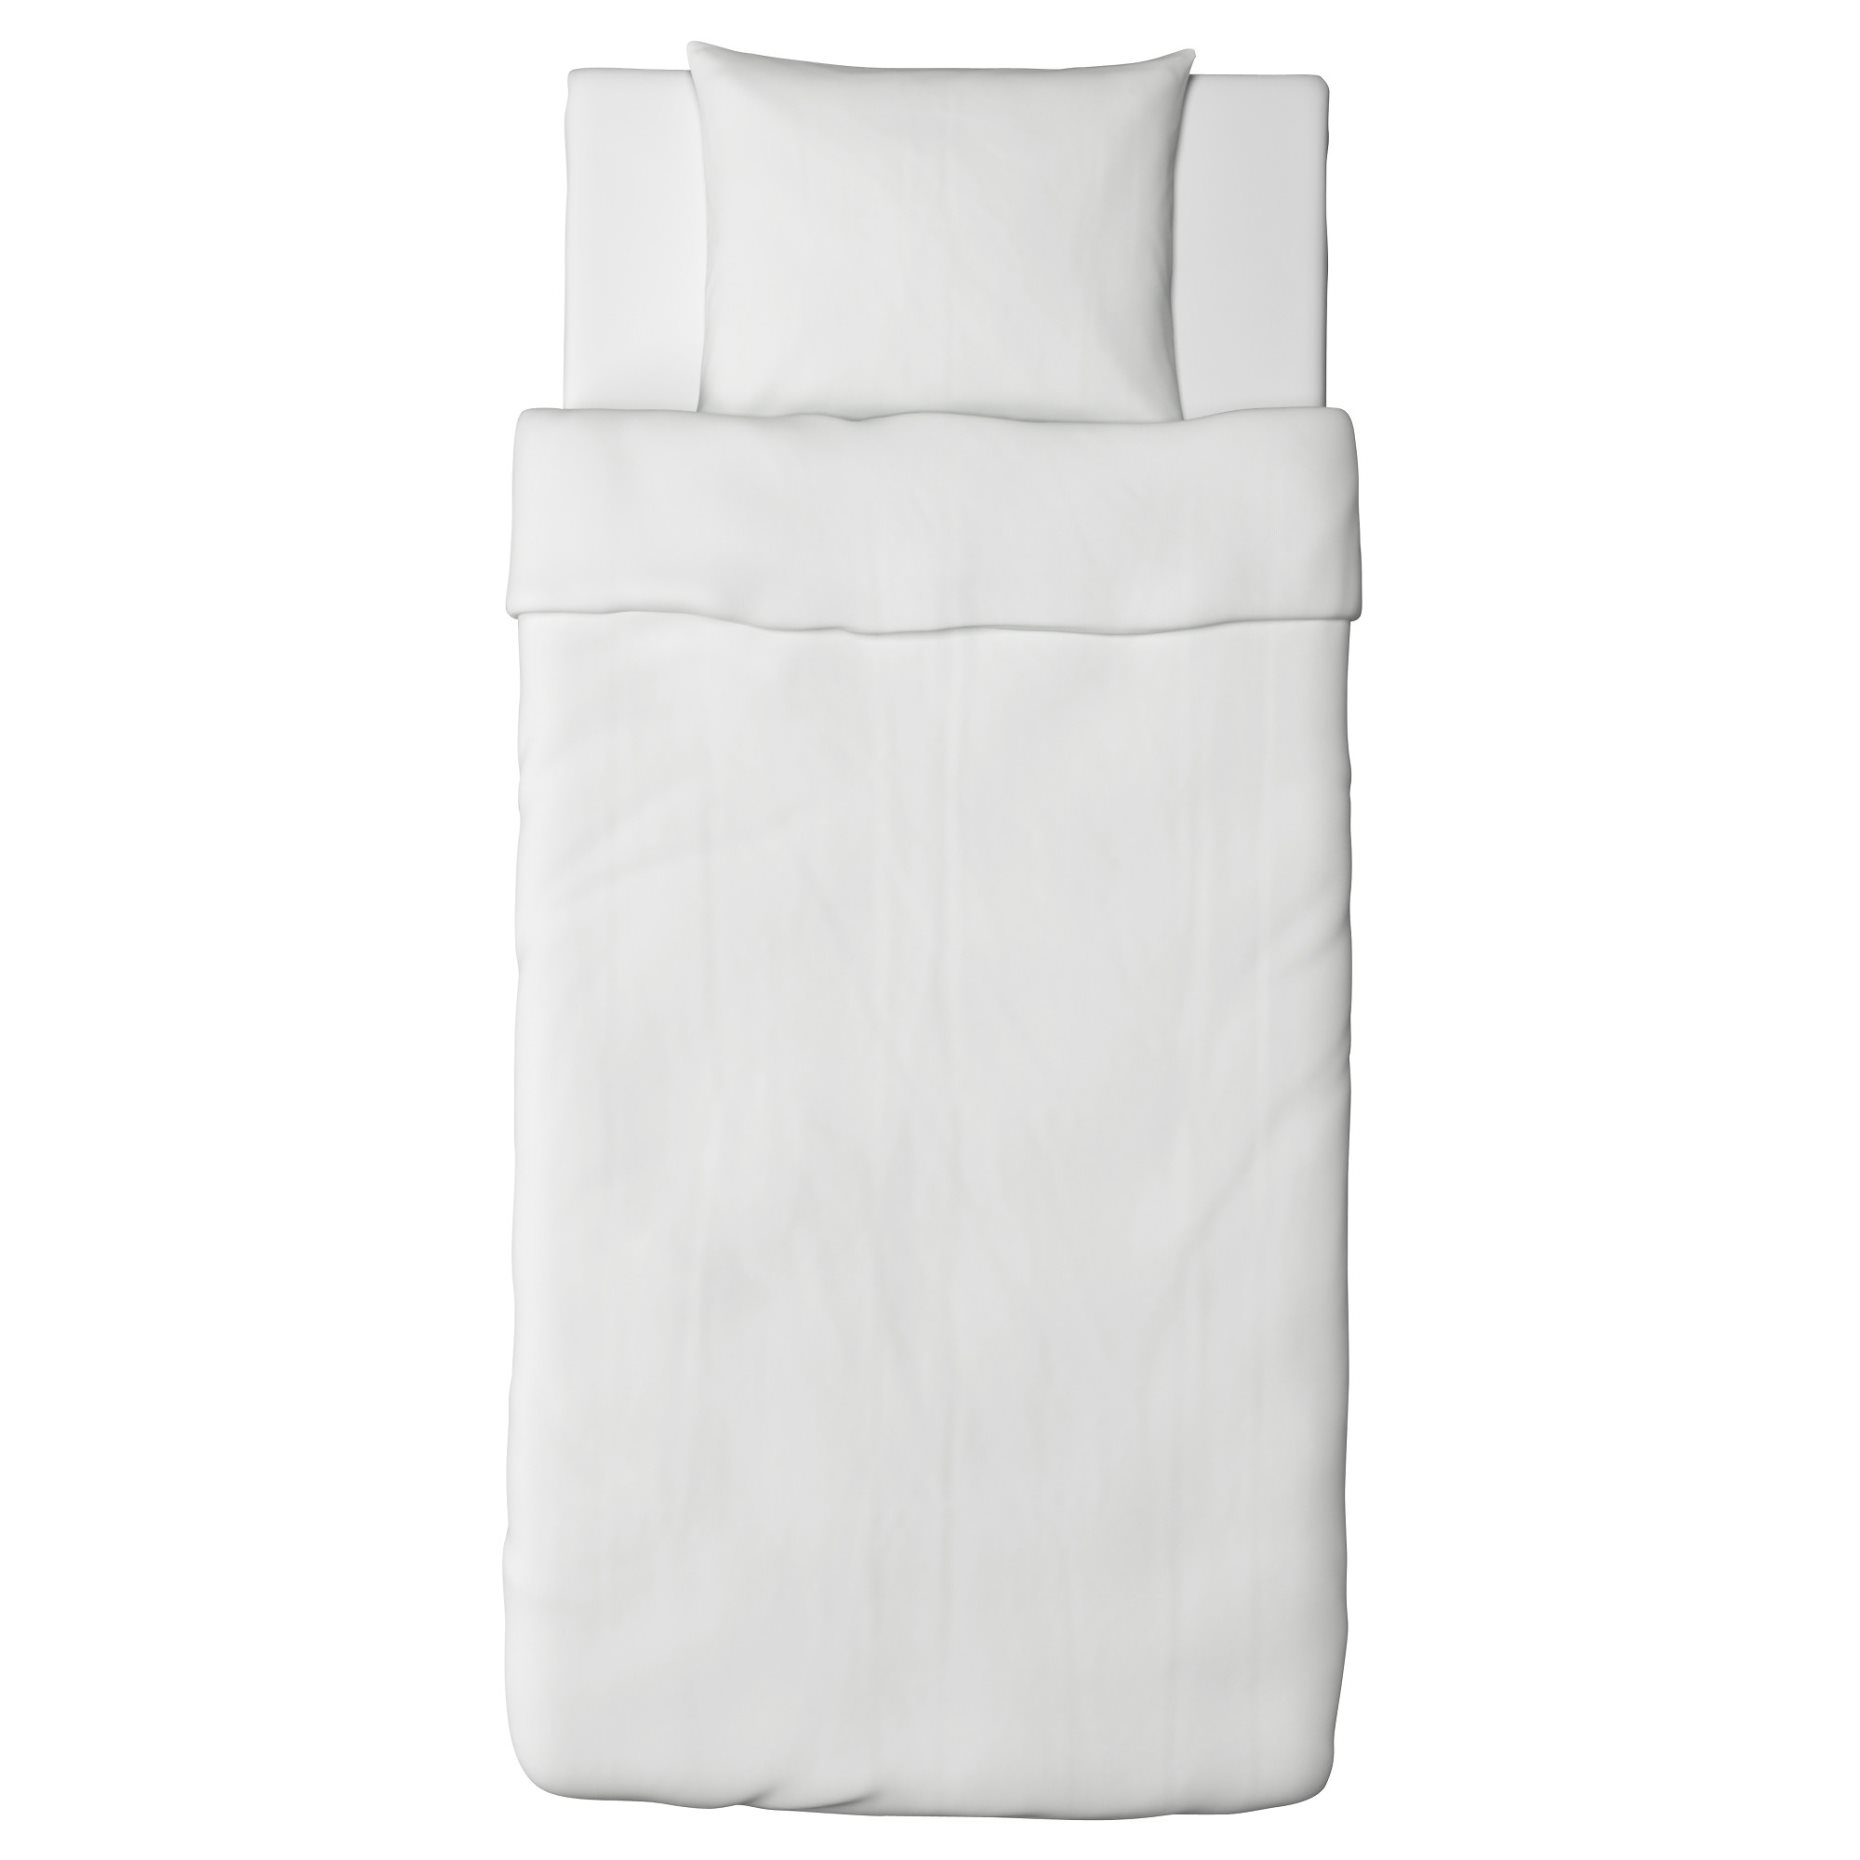 DVALA, quilt cover and pillowcase, 603.779.76